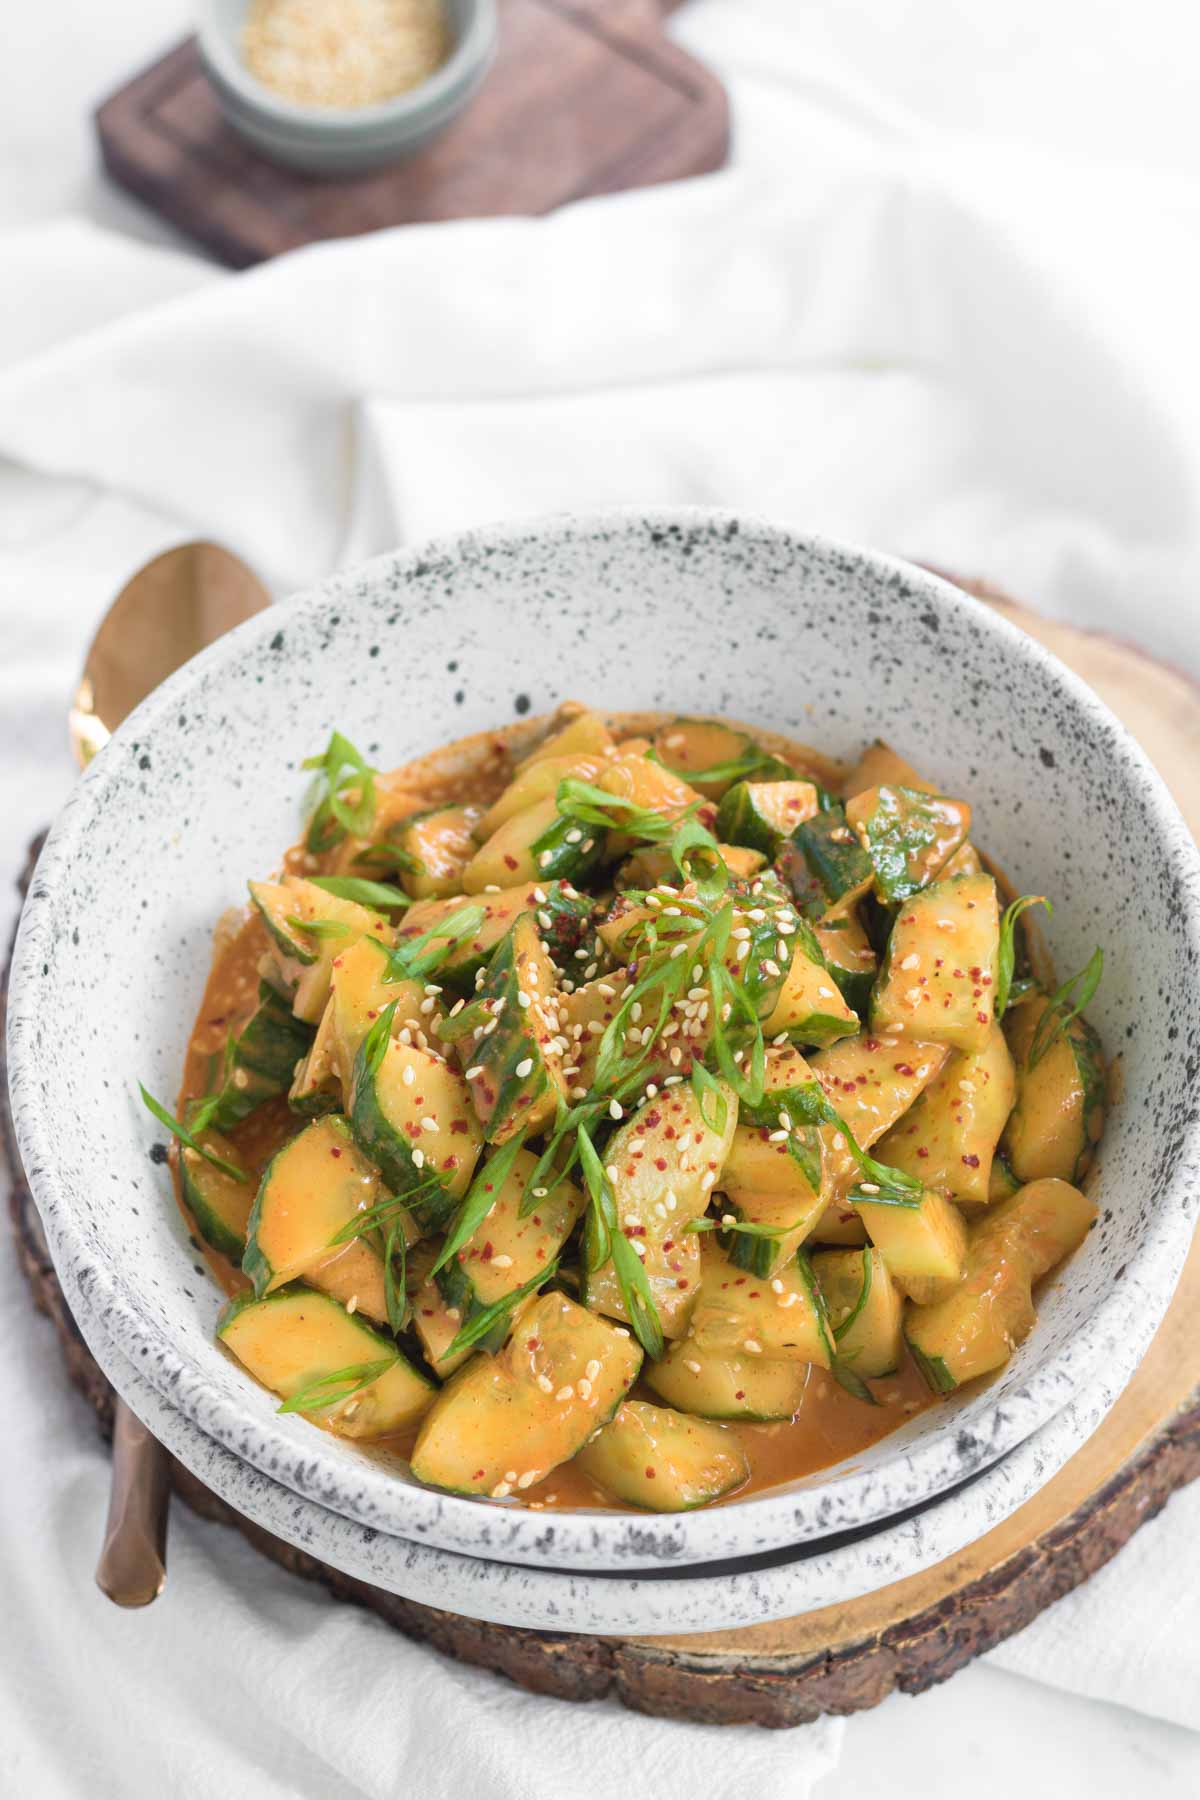 A bowl of smashed cucumbers in an orange sauce, garnished with sliced green onions.